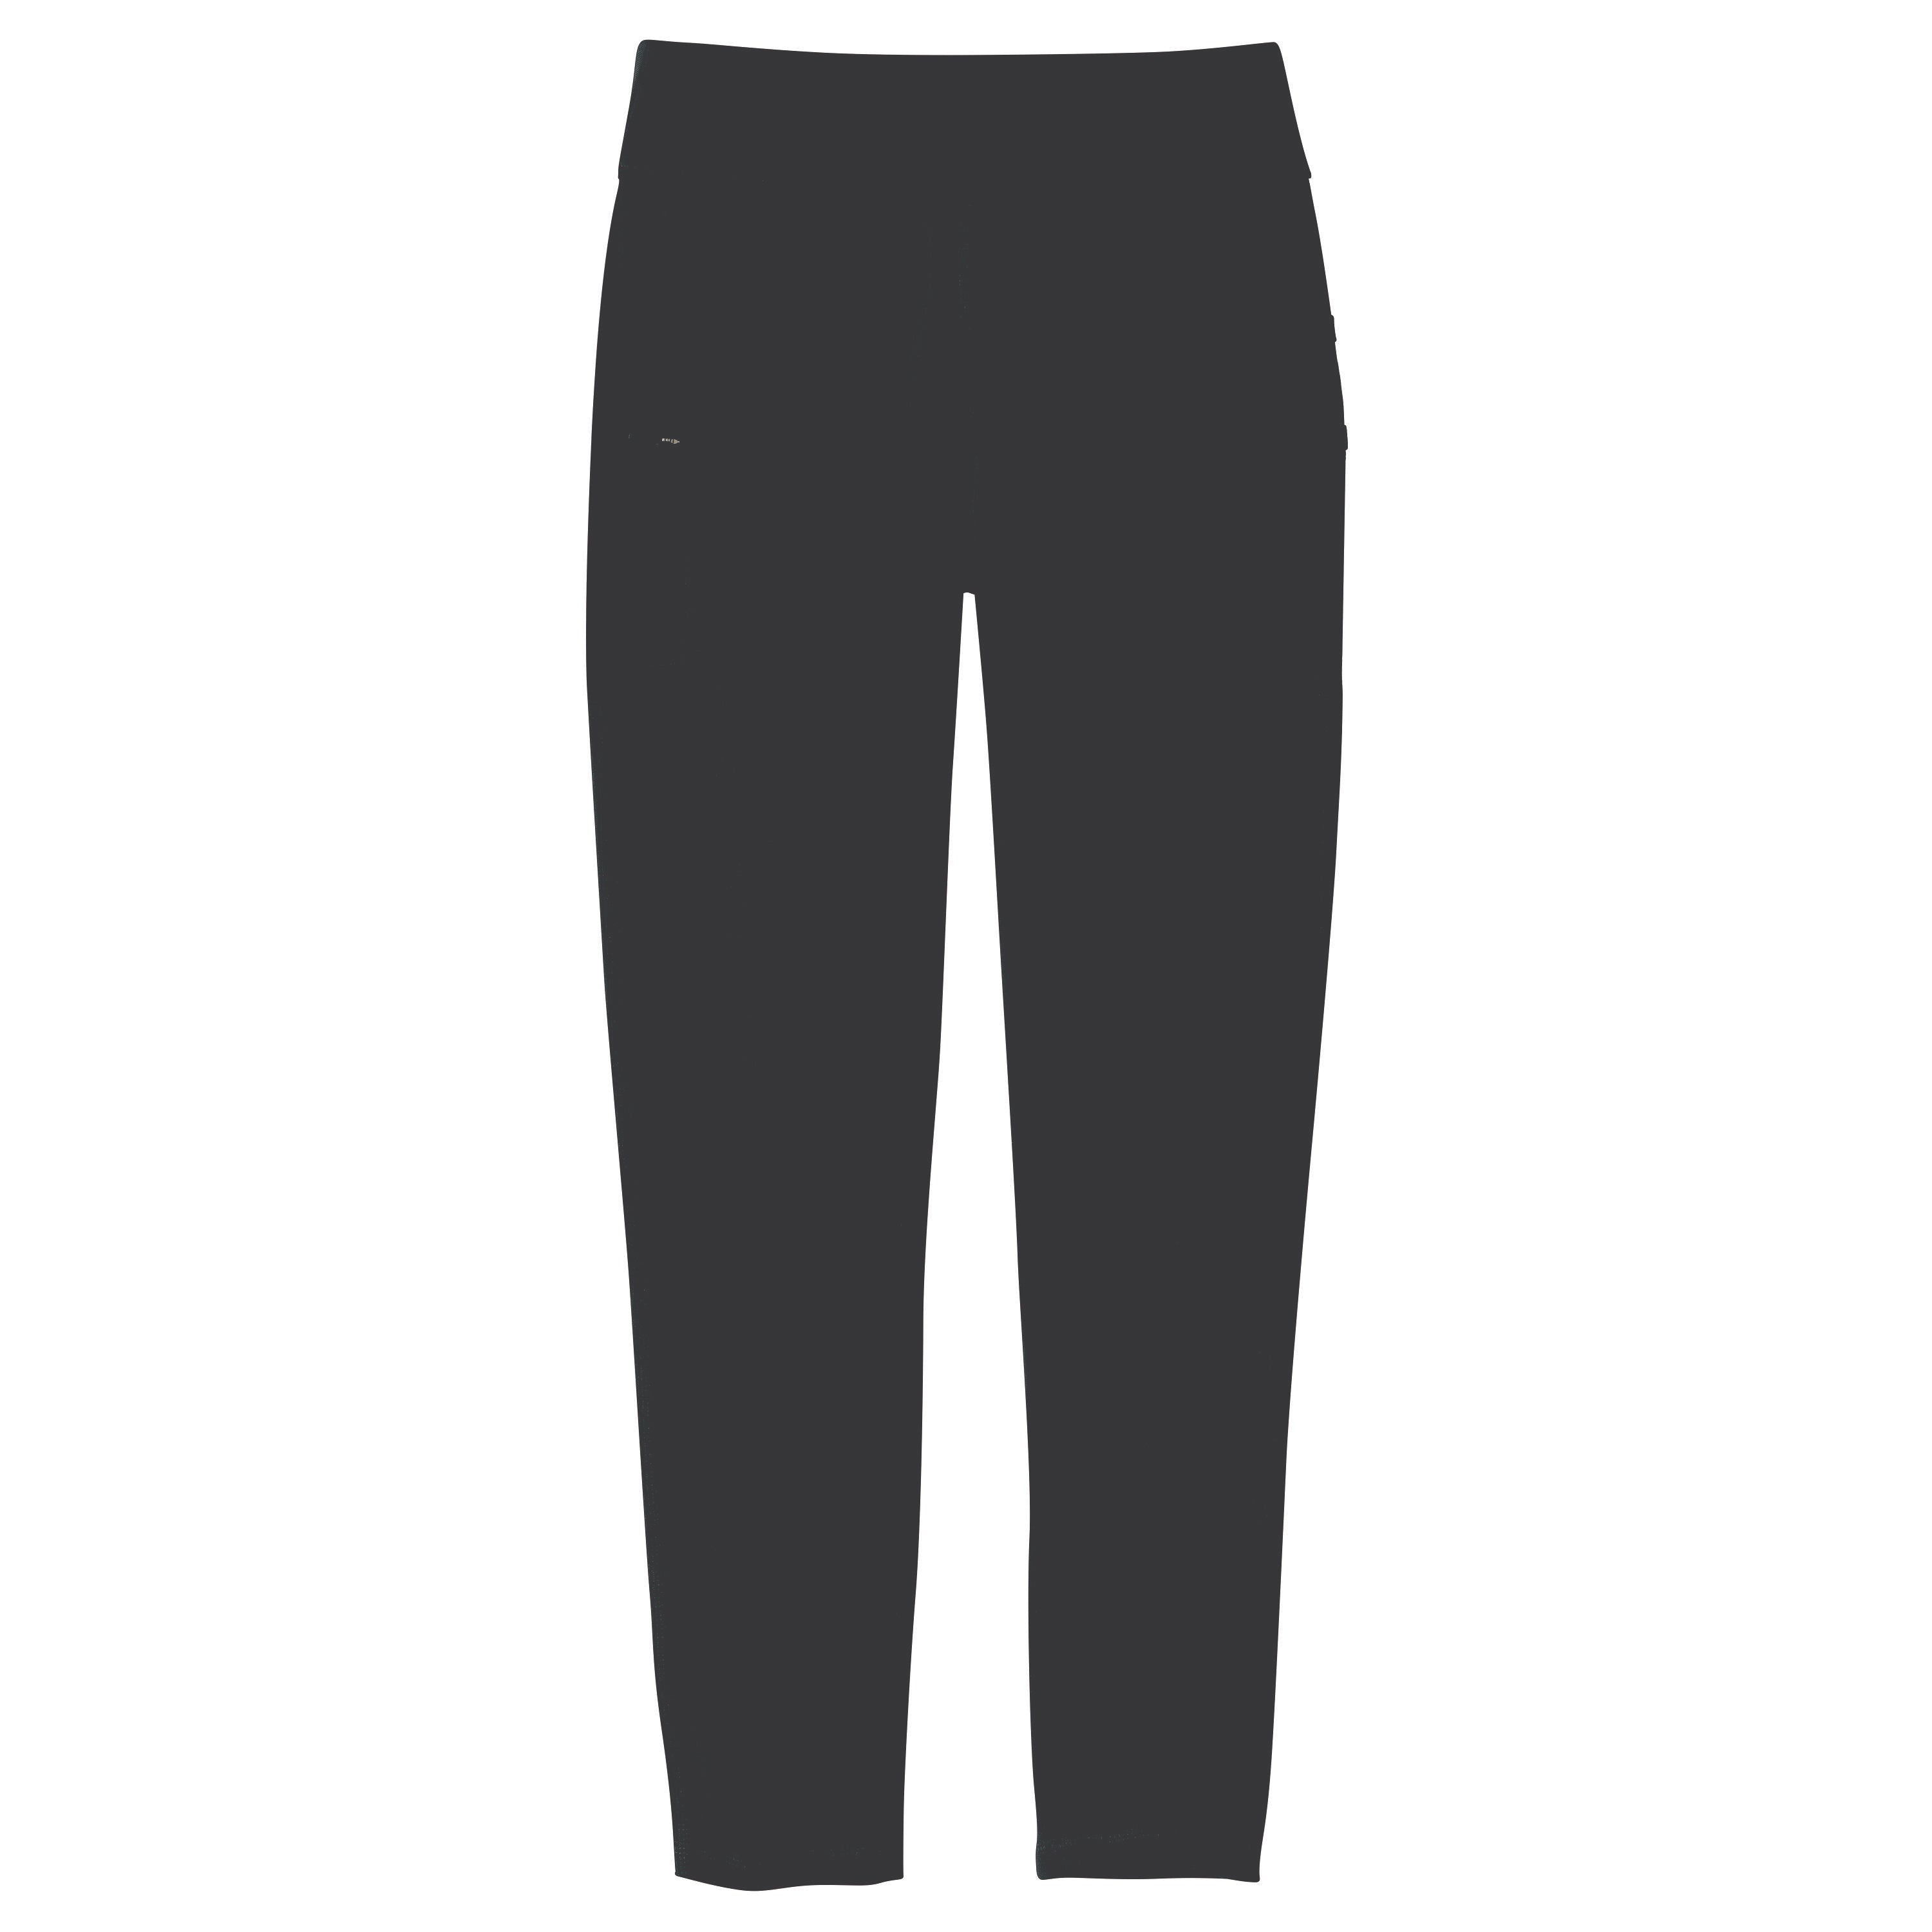 Carhartt Women's Force Fitted Heavyweight Lined Legging, Black